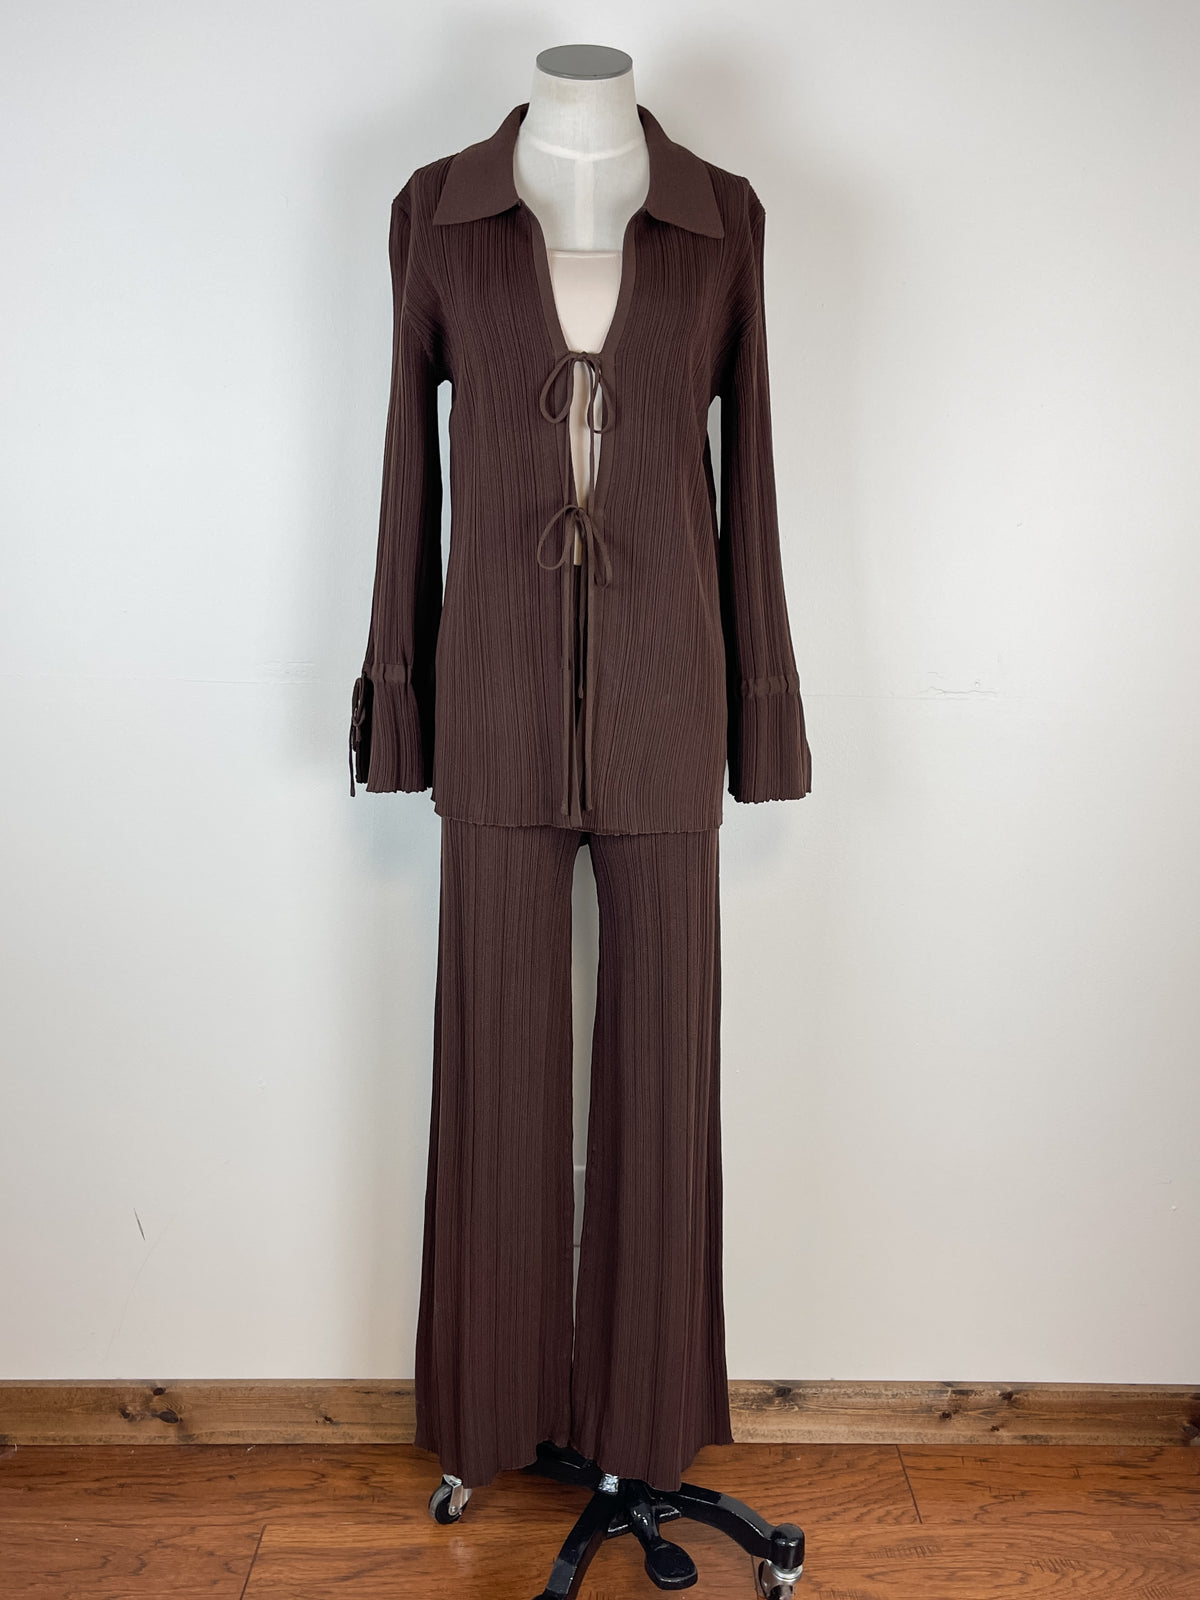 Maleah Tie Front Cardigan in Chocolate